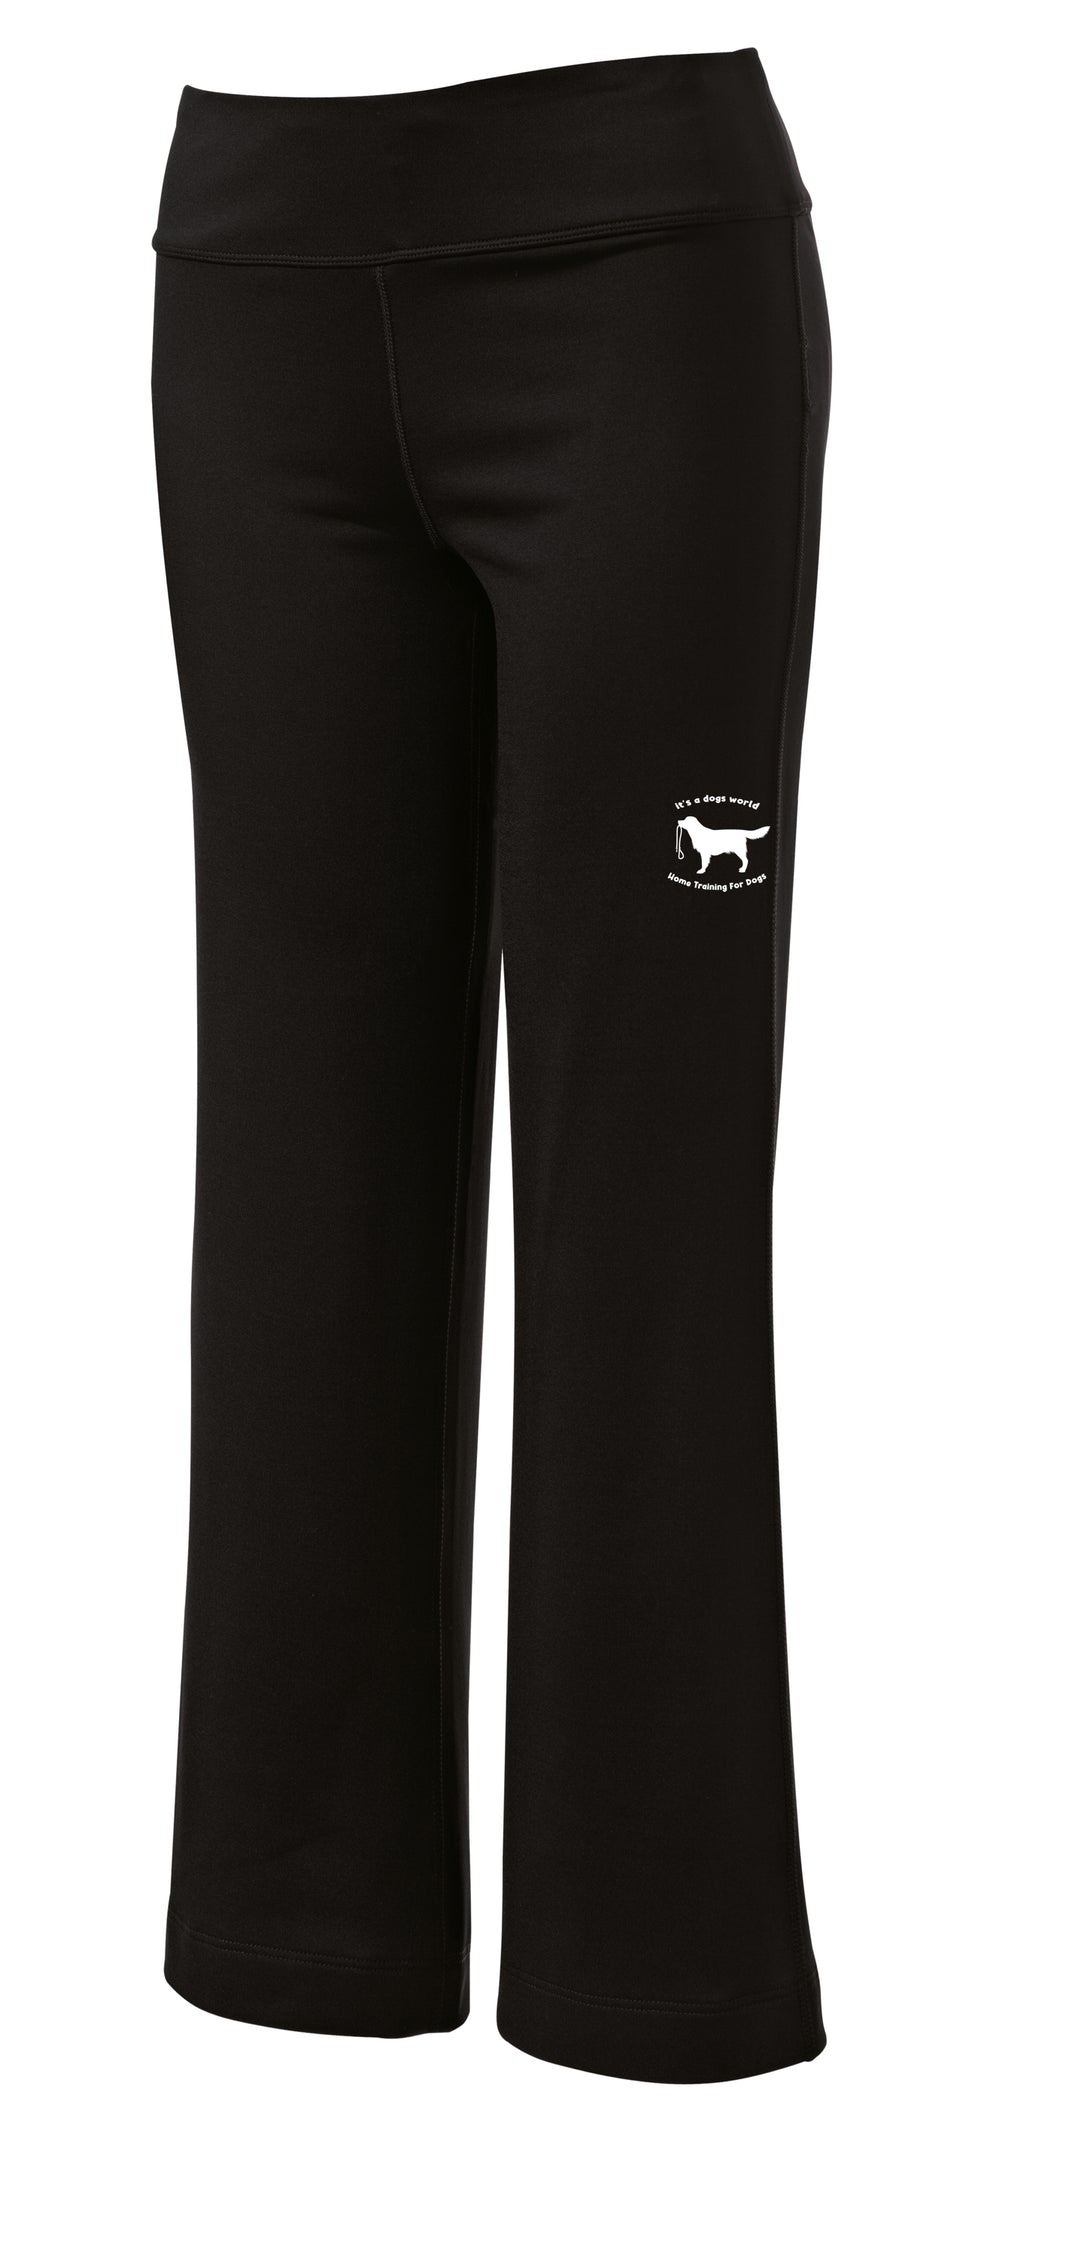 Home Training for Dogs Ladies NRG Fitness Pant (LPST880)